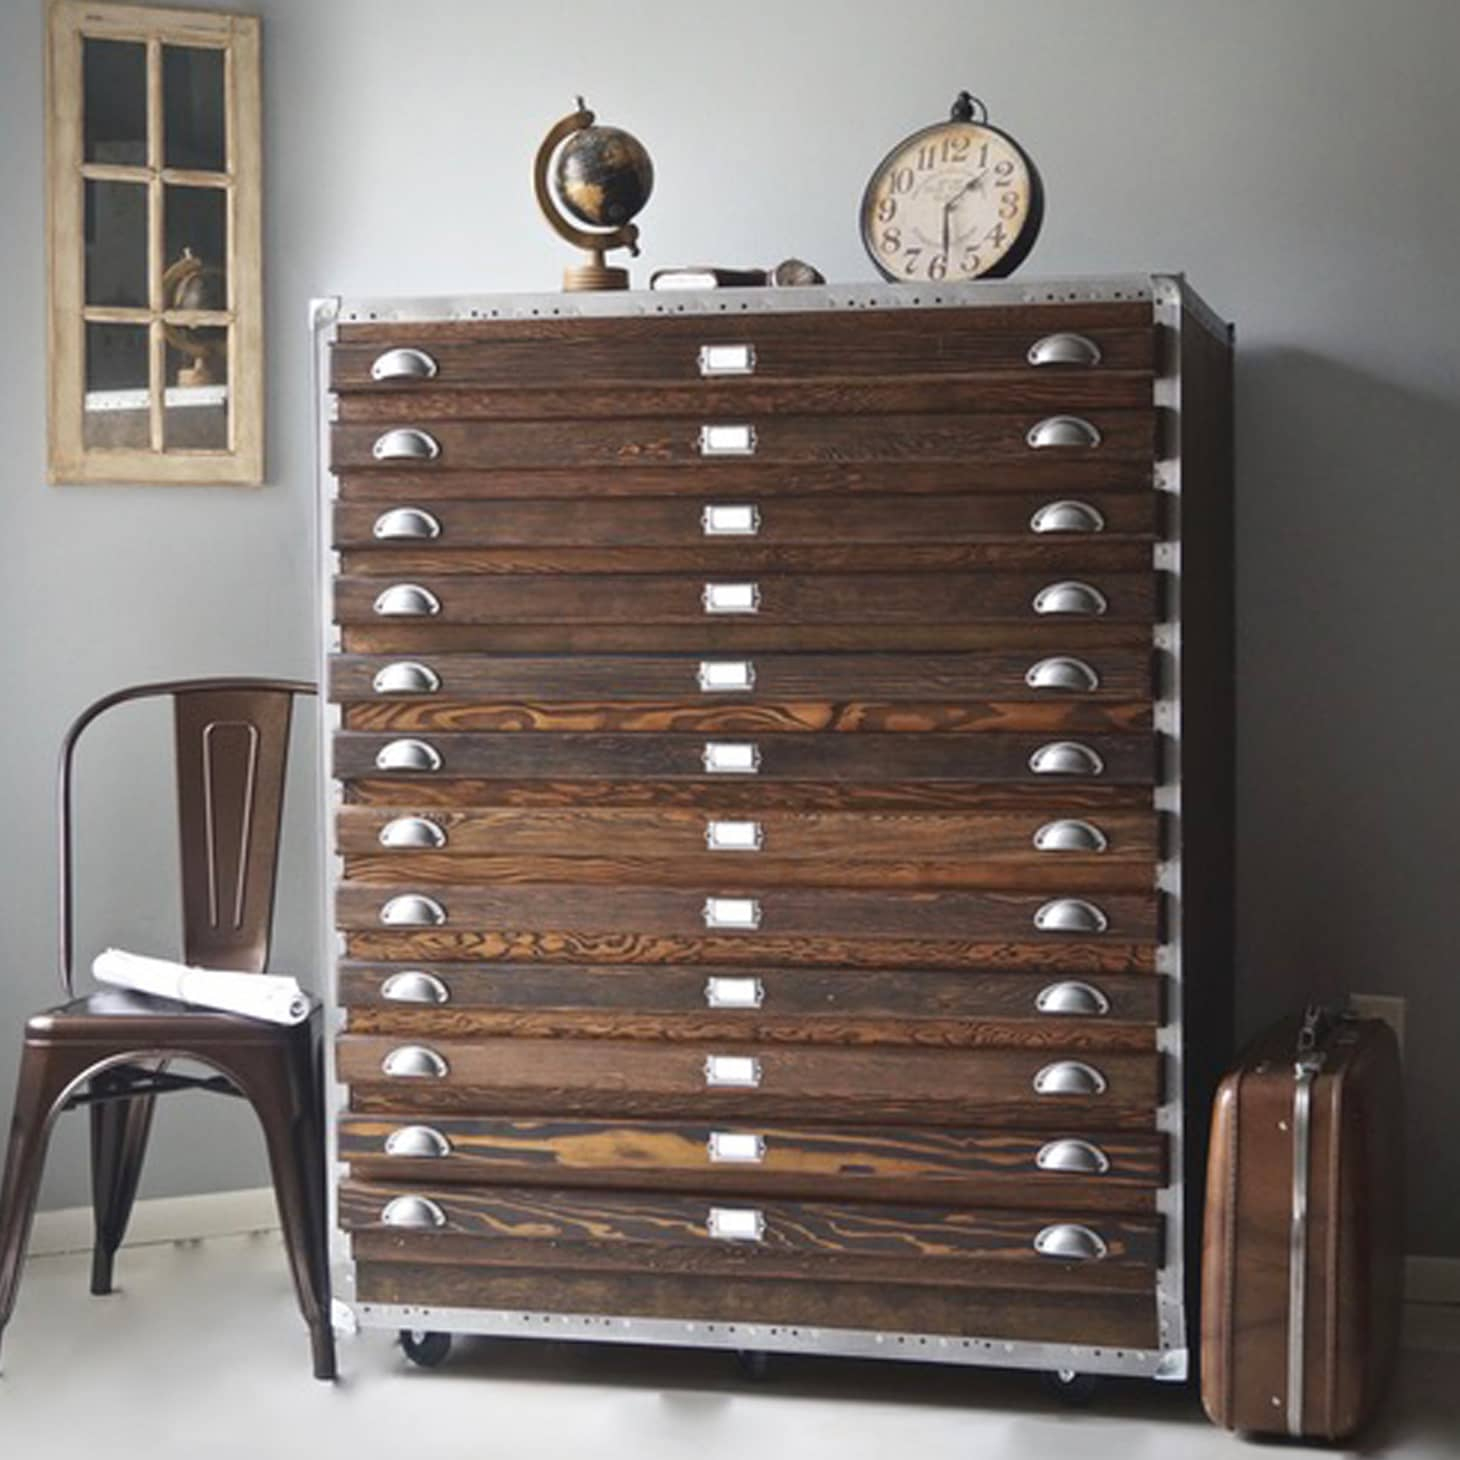 Get It For Less Vintage Industrial Flat File Cabinet Apartment regarding proportions 1460 X 1460